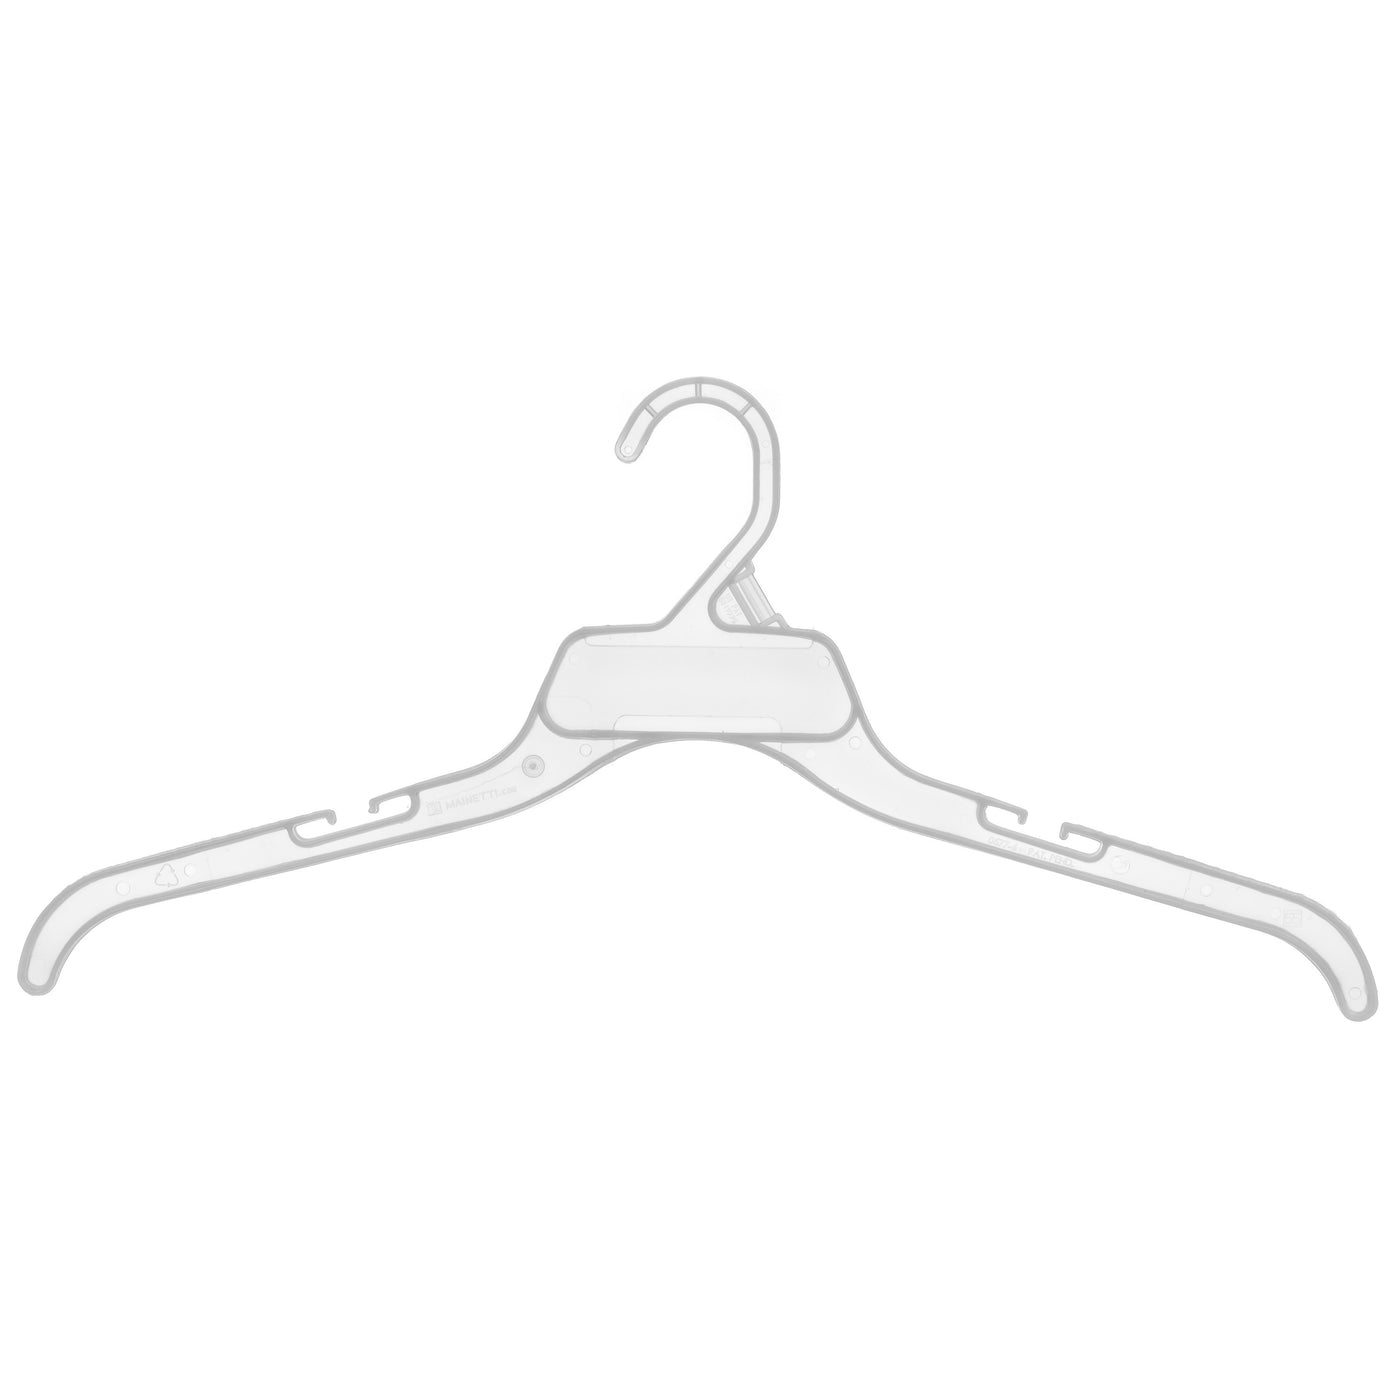 Mainetti 495, 10 White all Plastic, Shirt Top Dress Hangers, with